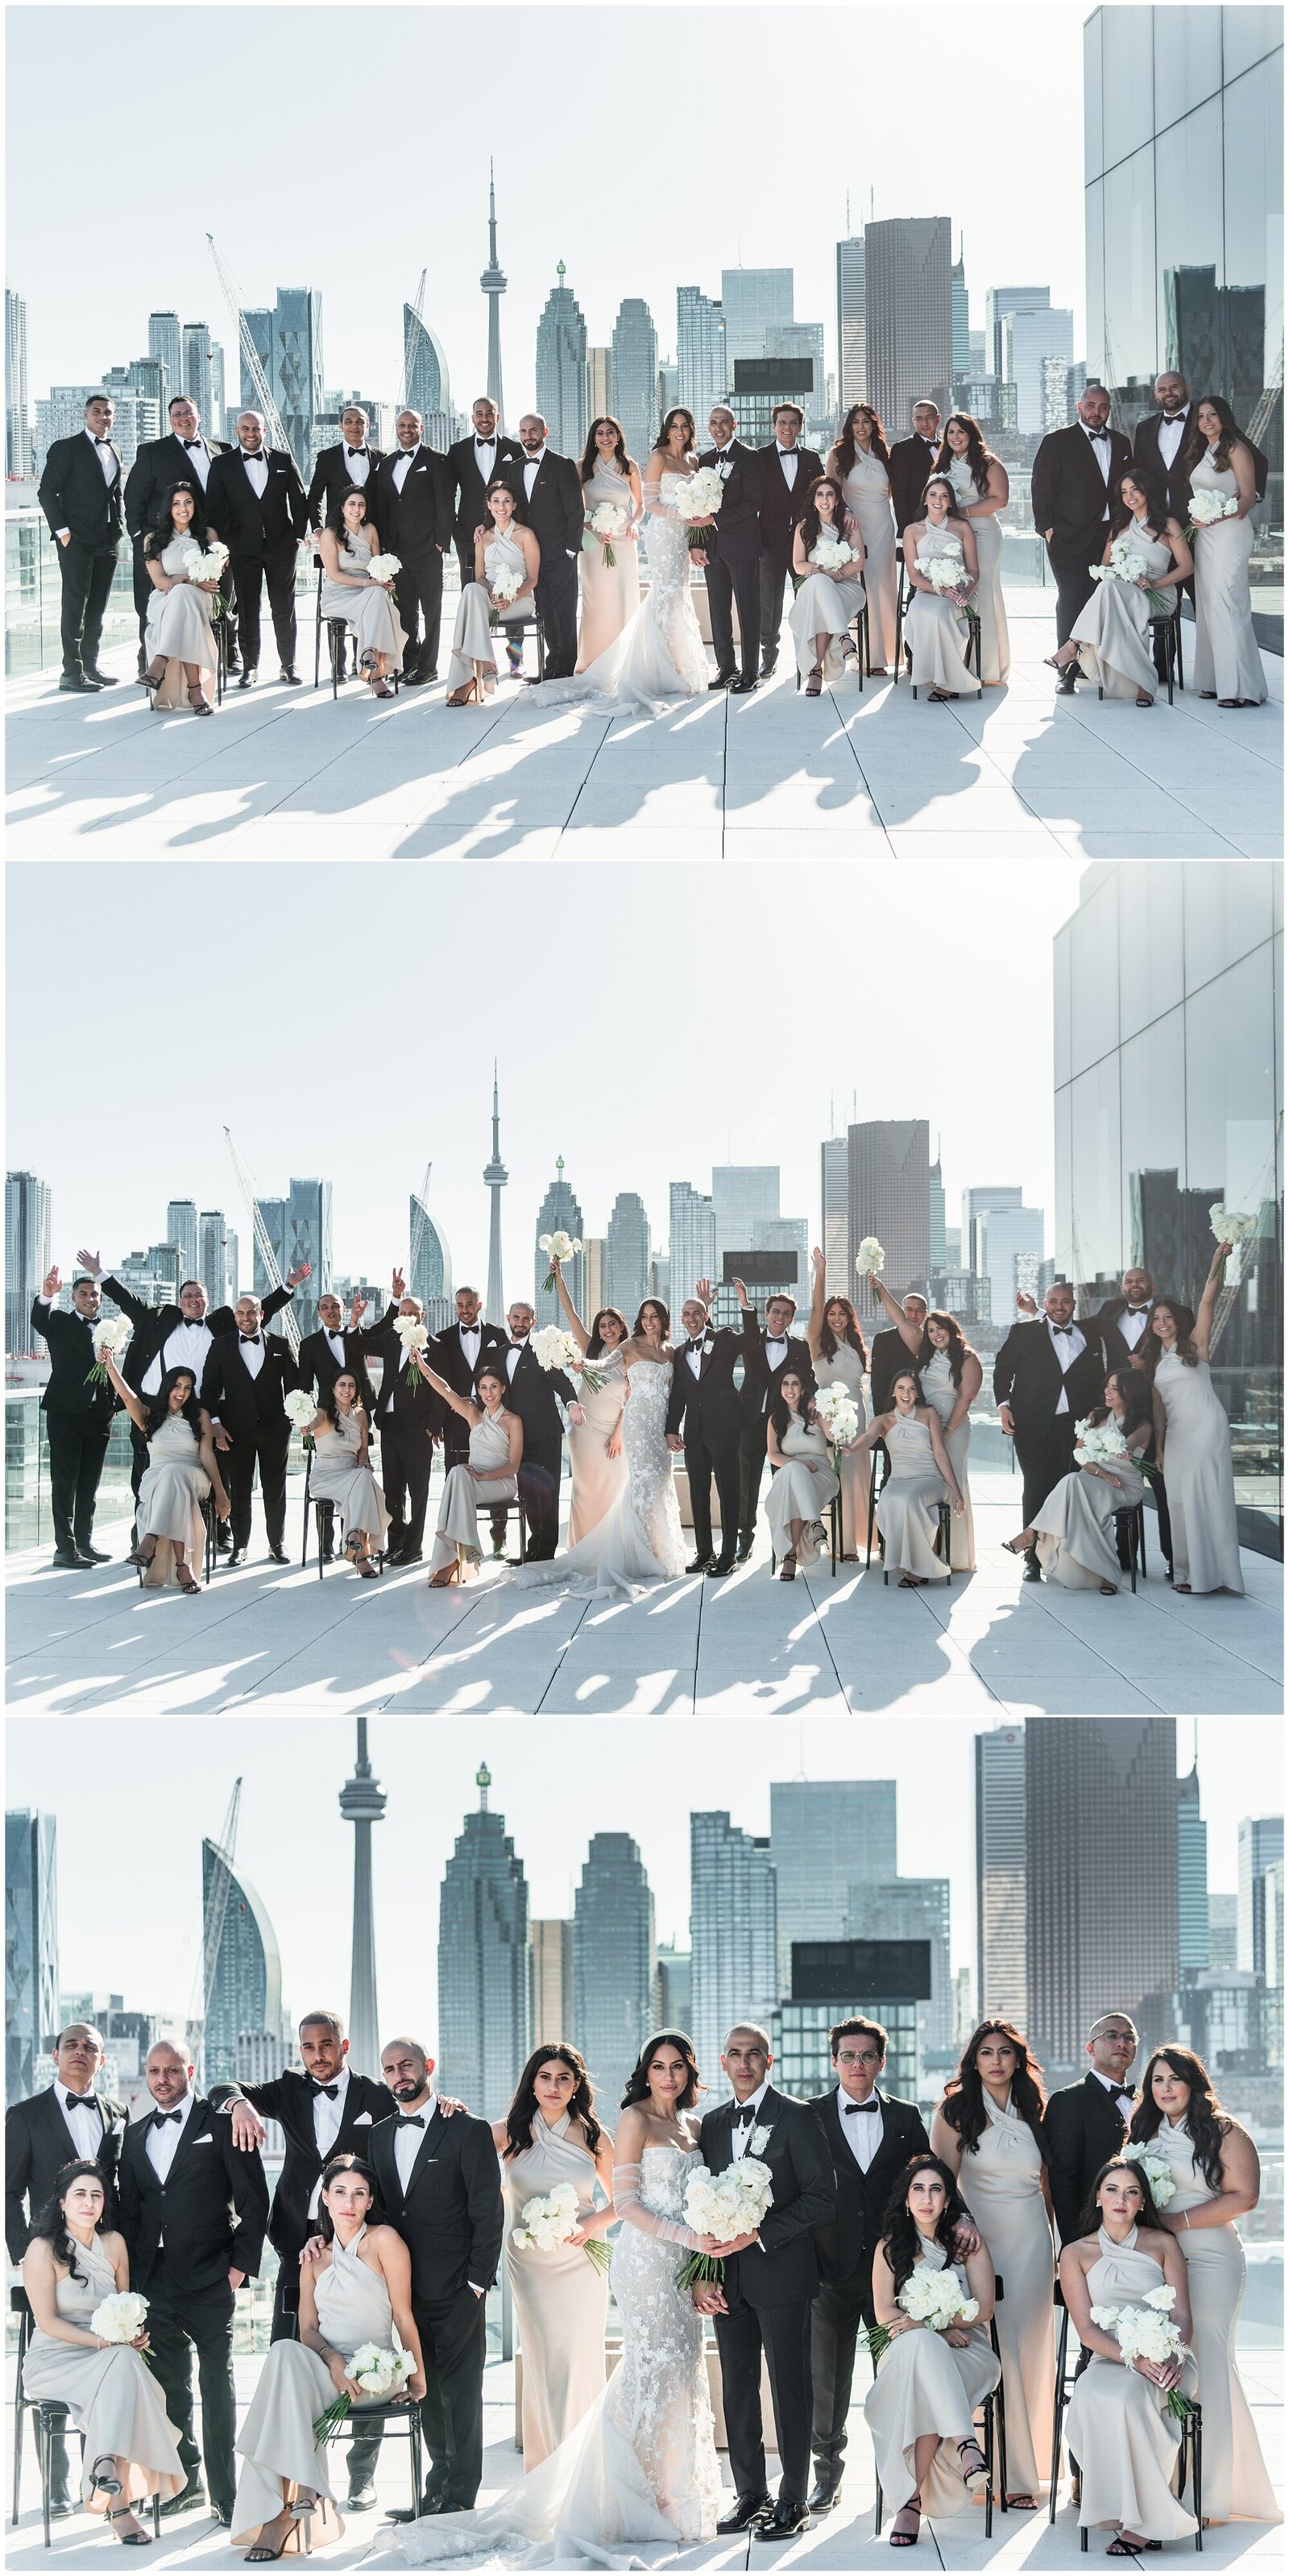 Epic wedding party portraits at The Globe and Mail with Toronto Skyline in the background